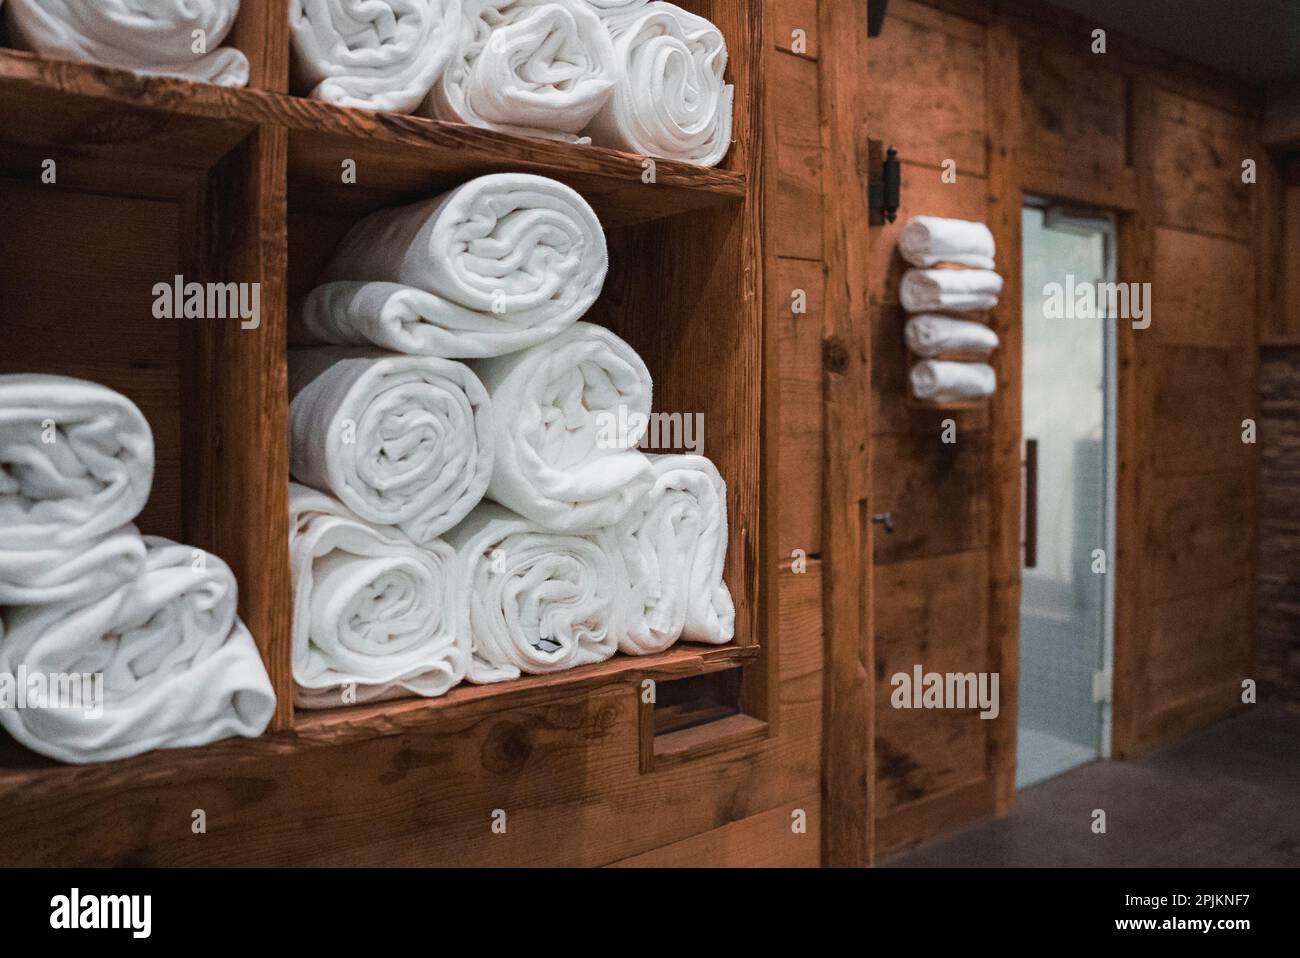 https://c8.alamy.com/comp/2PJKNF7/clean-white-towels-rolled-and-stacked-in-shelf-of-sauna-in-luxury-hotel-spa-2PJKNF7.jpg